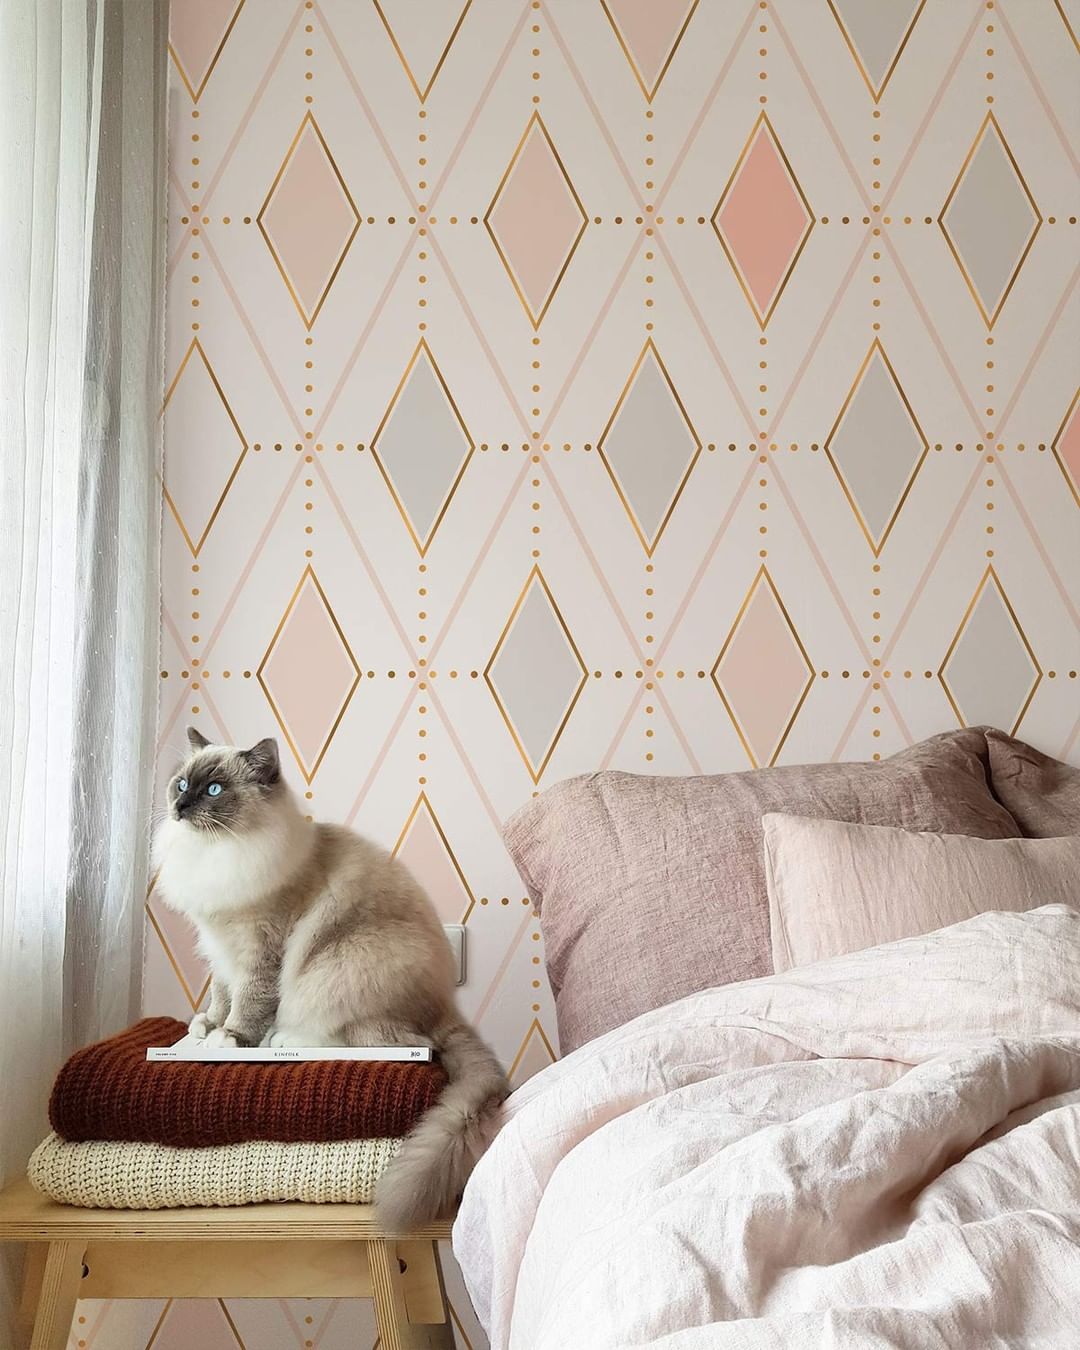 Why Are Wallpapers Becoming A Solution For Your Home Design Woes?